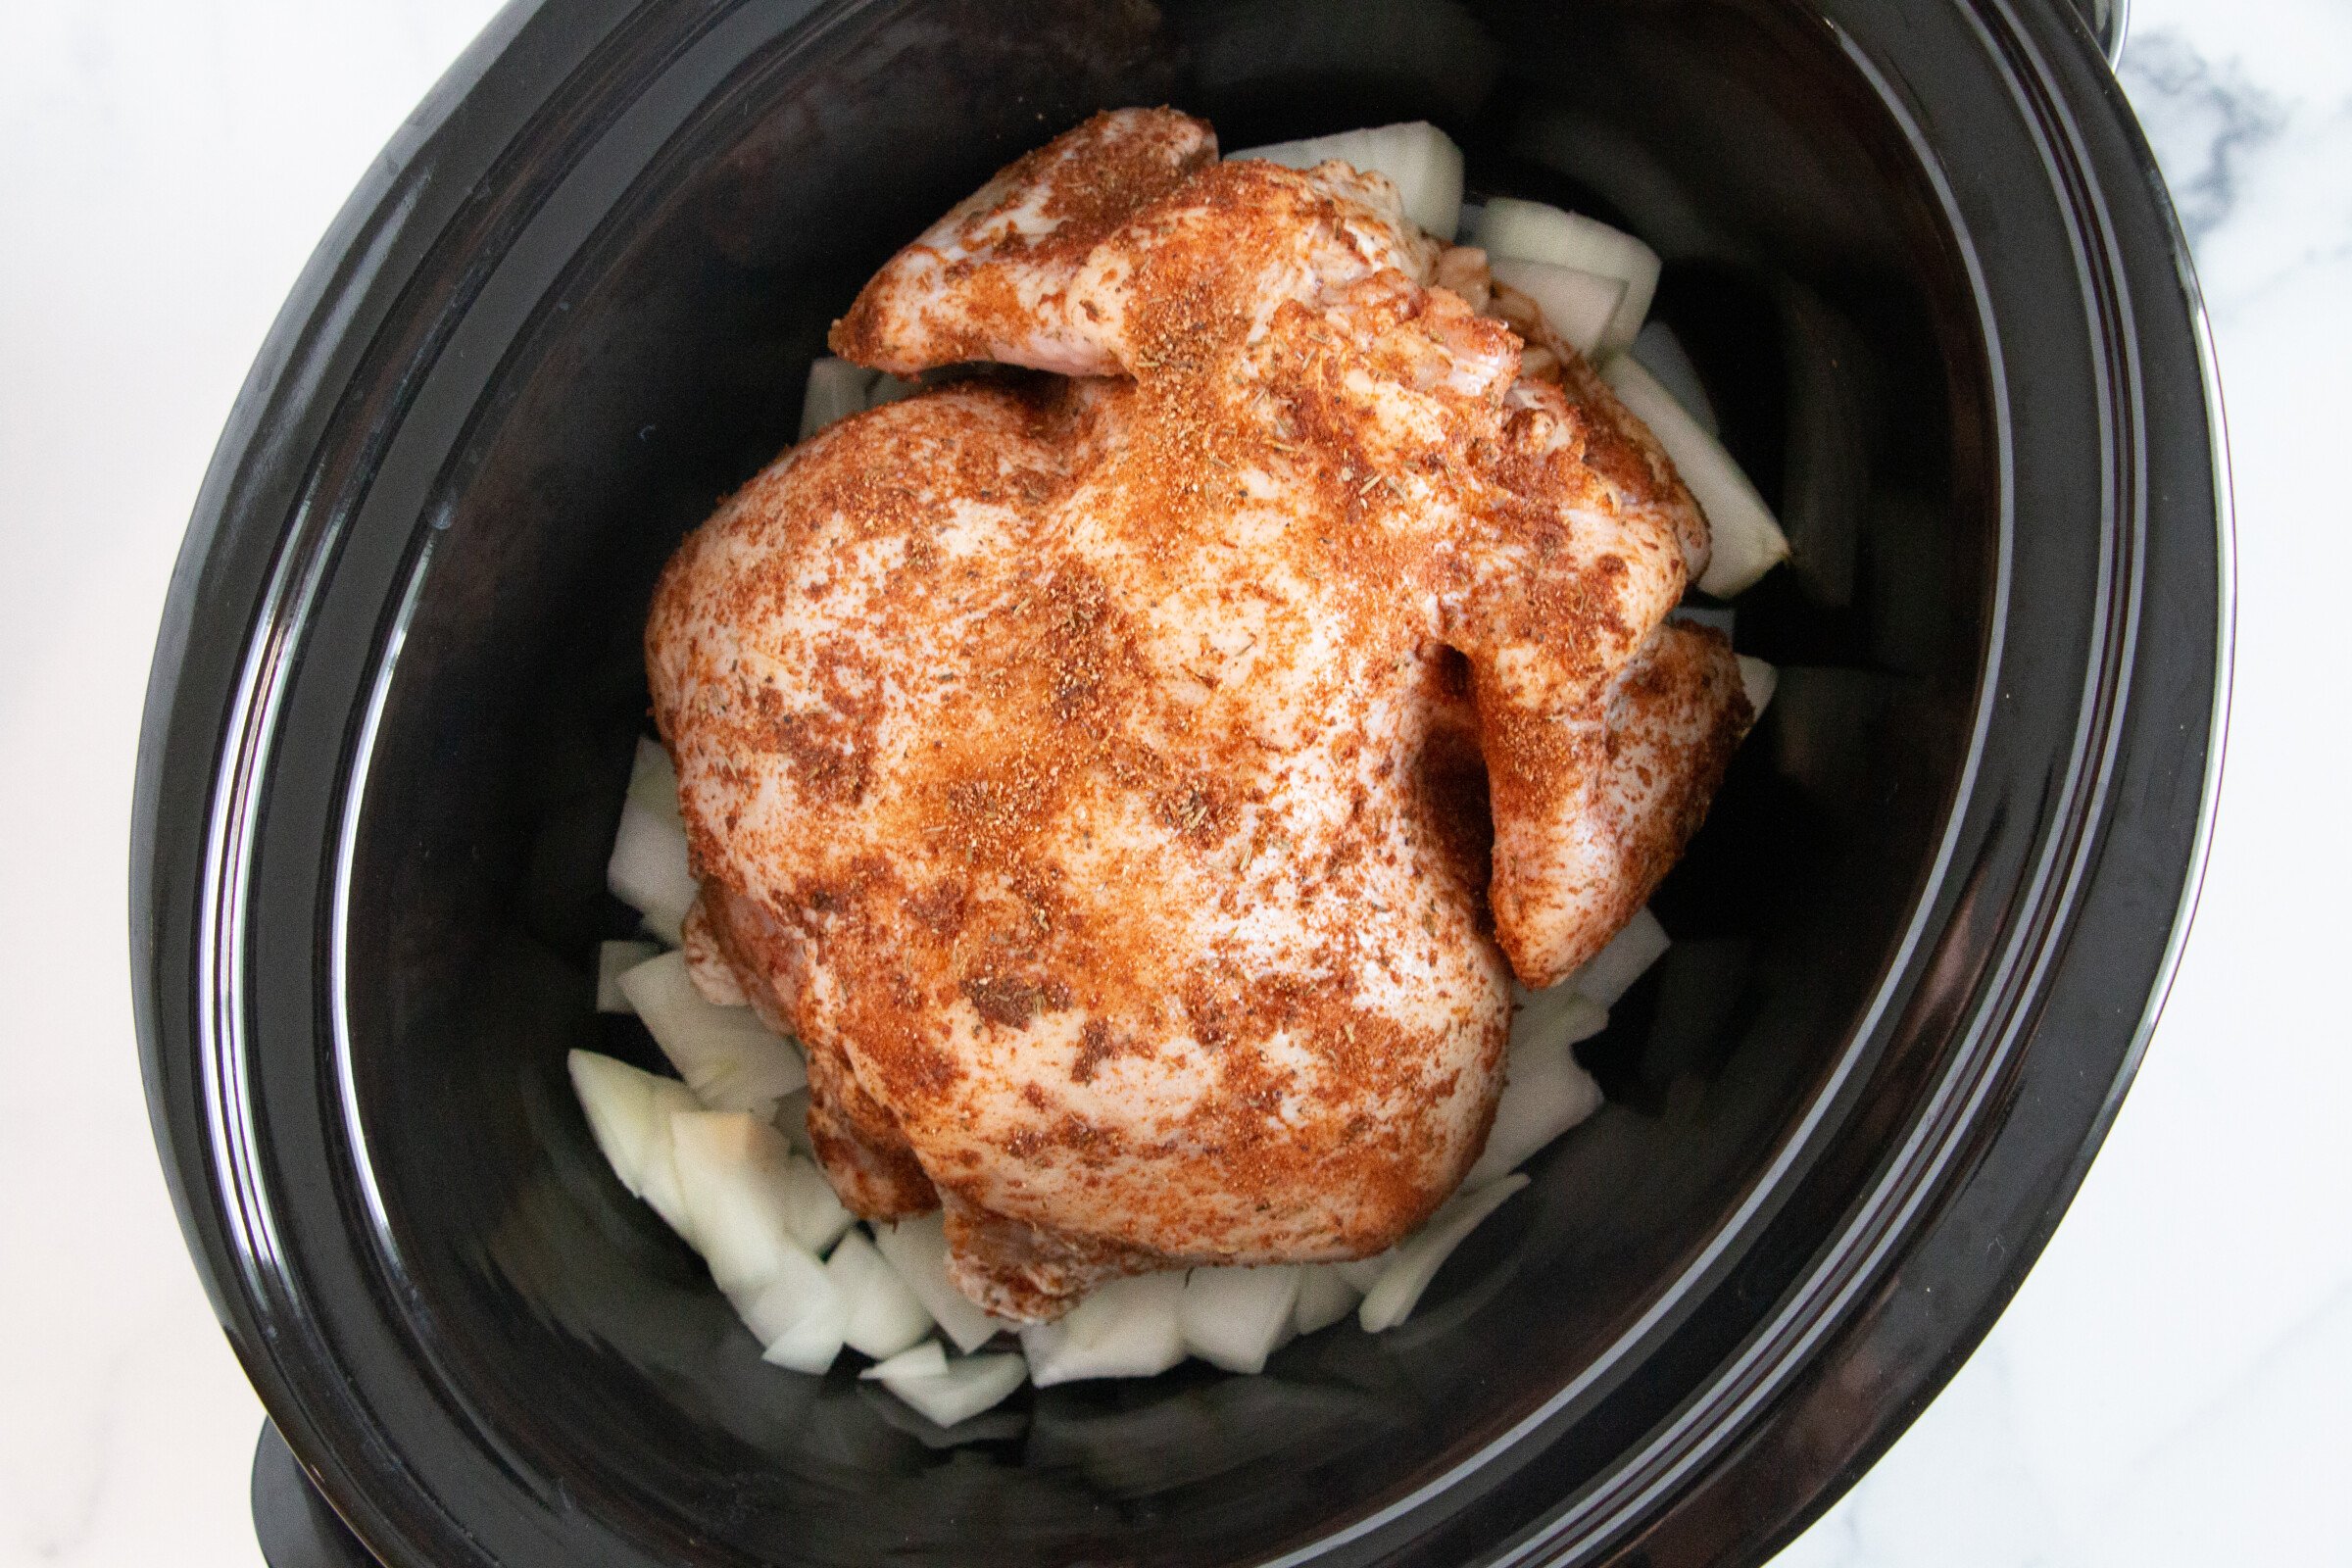 Whole chicken inside a slow cooker on a bed of chopped onions